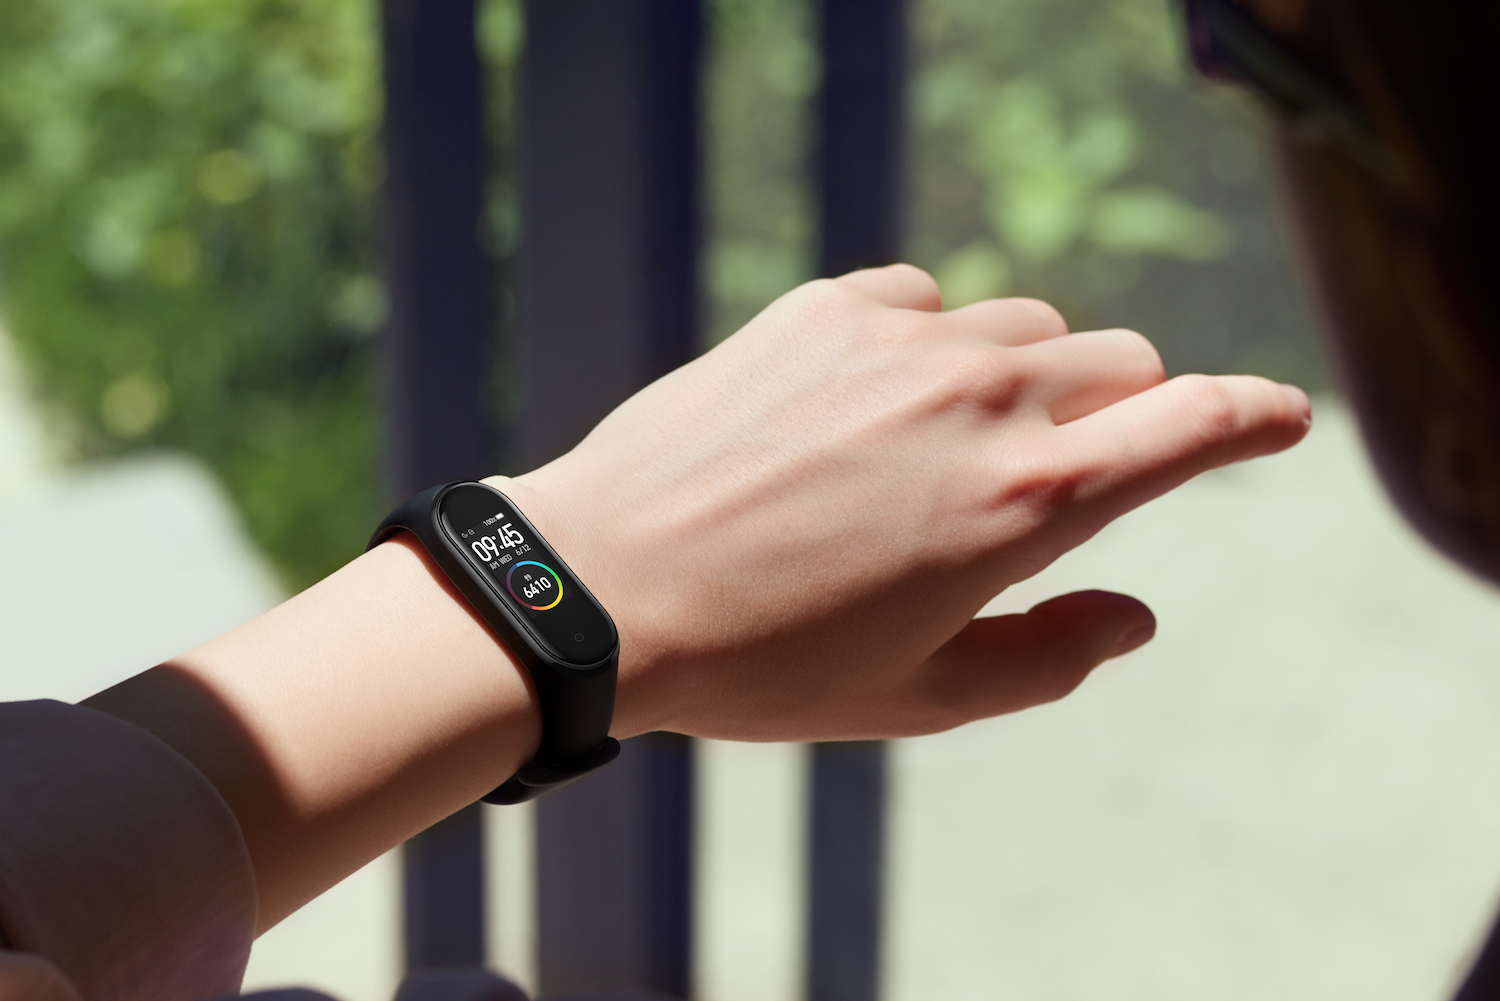 Xiaomi Mi Smart Band 4 is a Desirable Fitness Band/Smartwatch